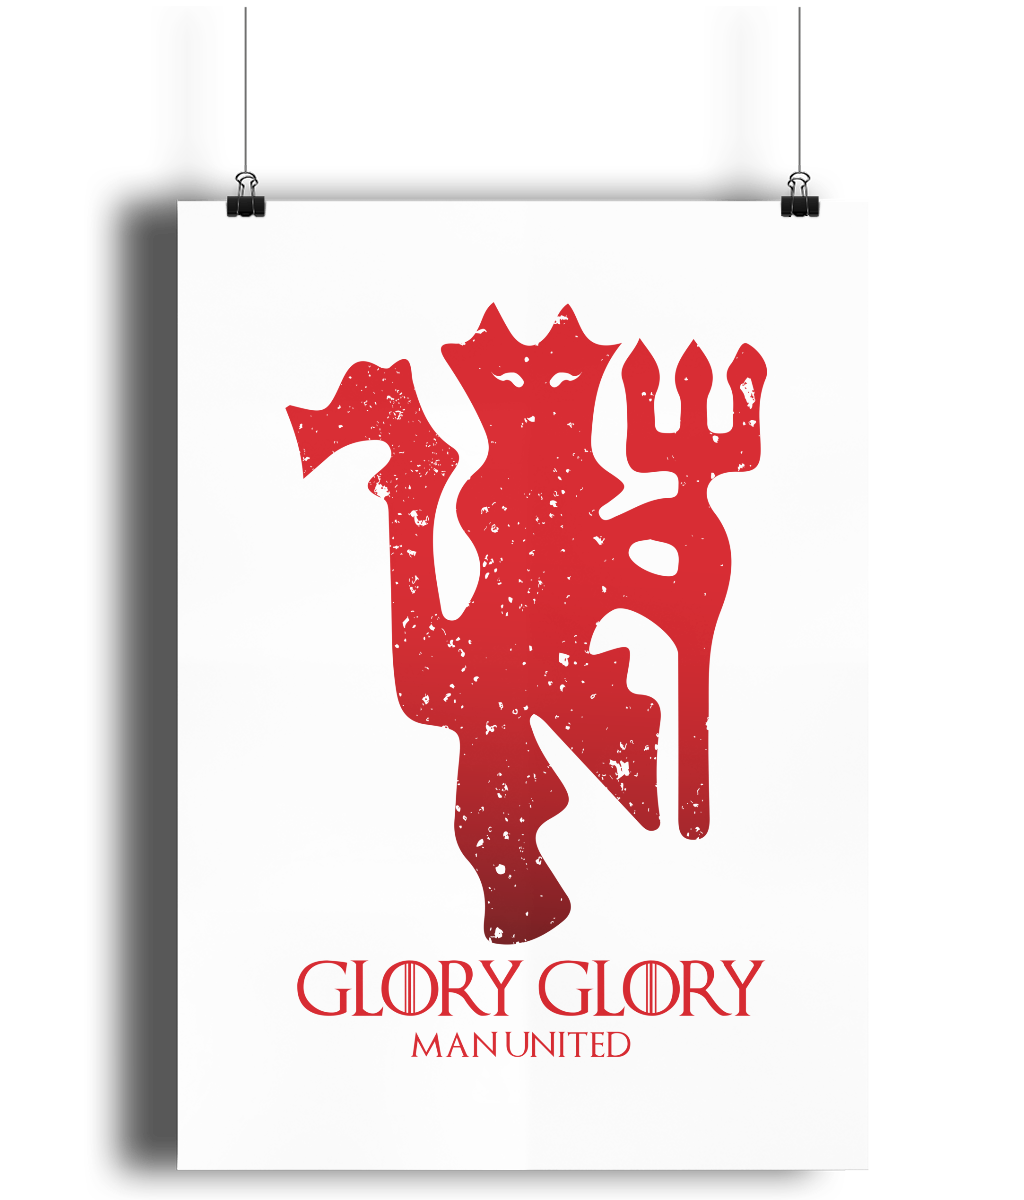 House Man United Poster